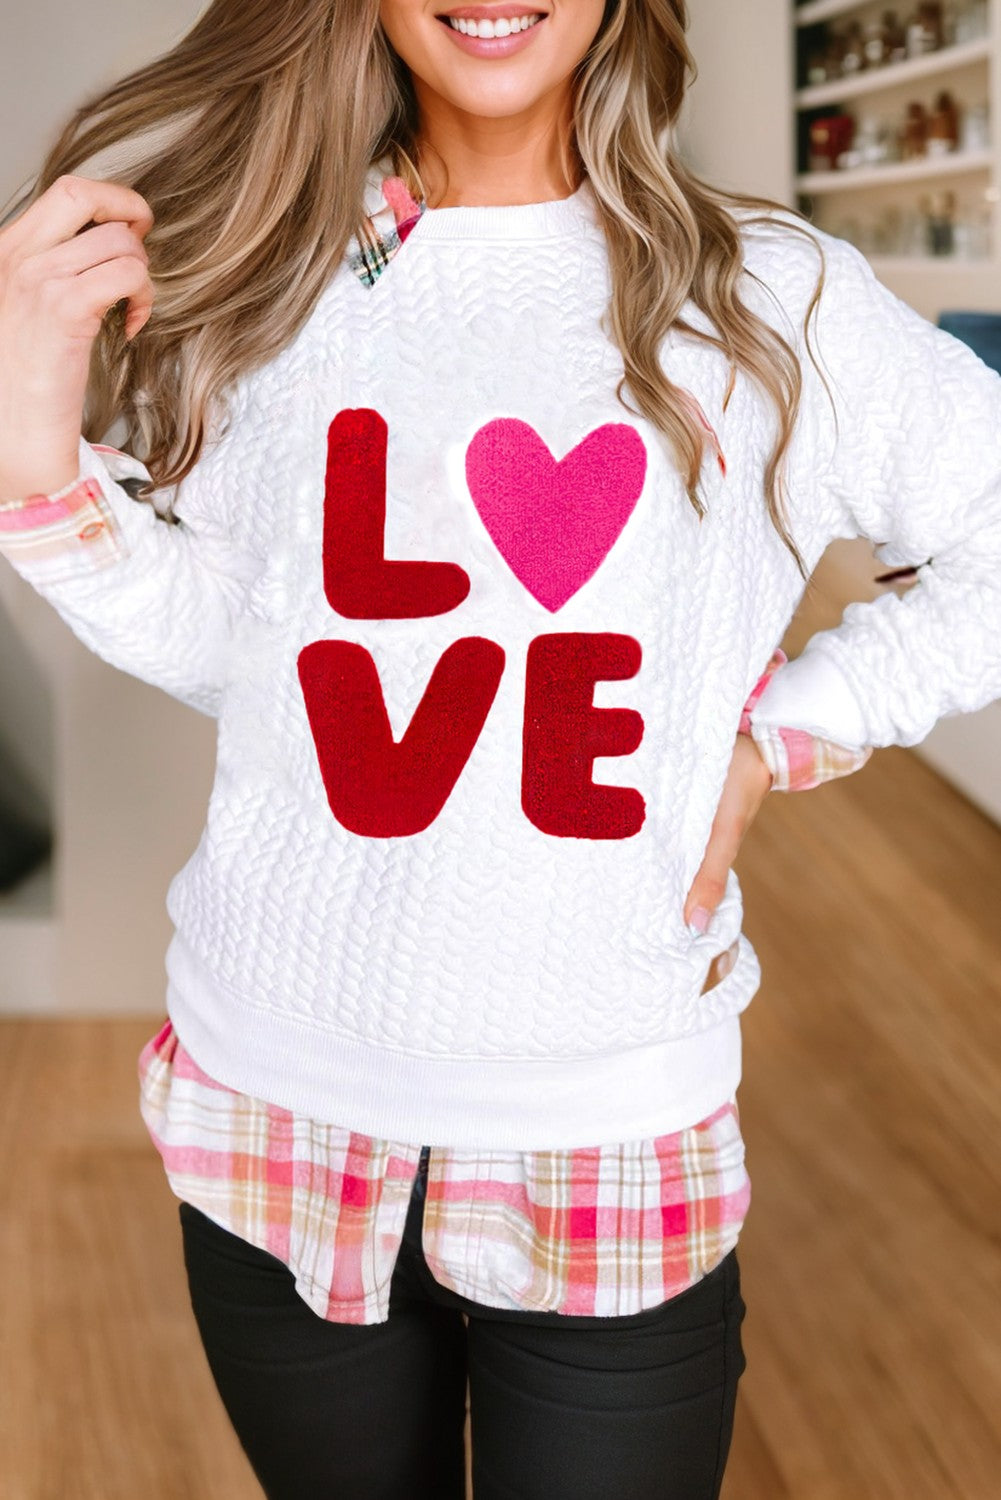 KENTCE LOVE CABLE PULLOVER